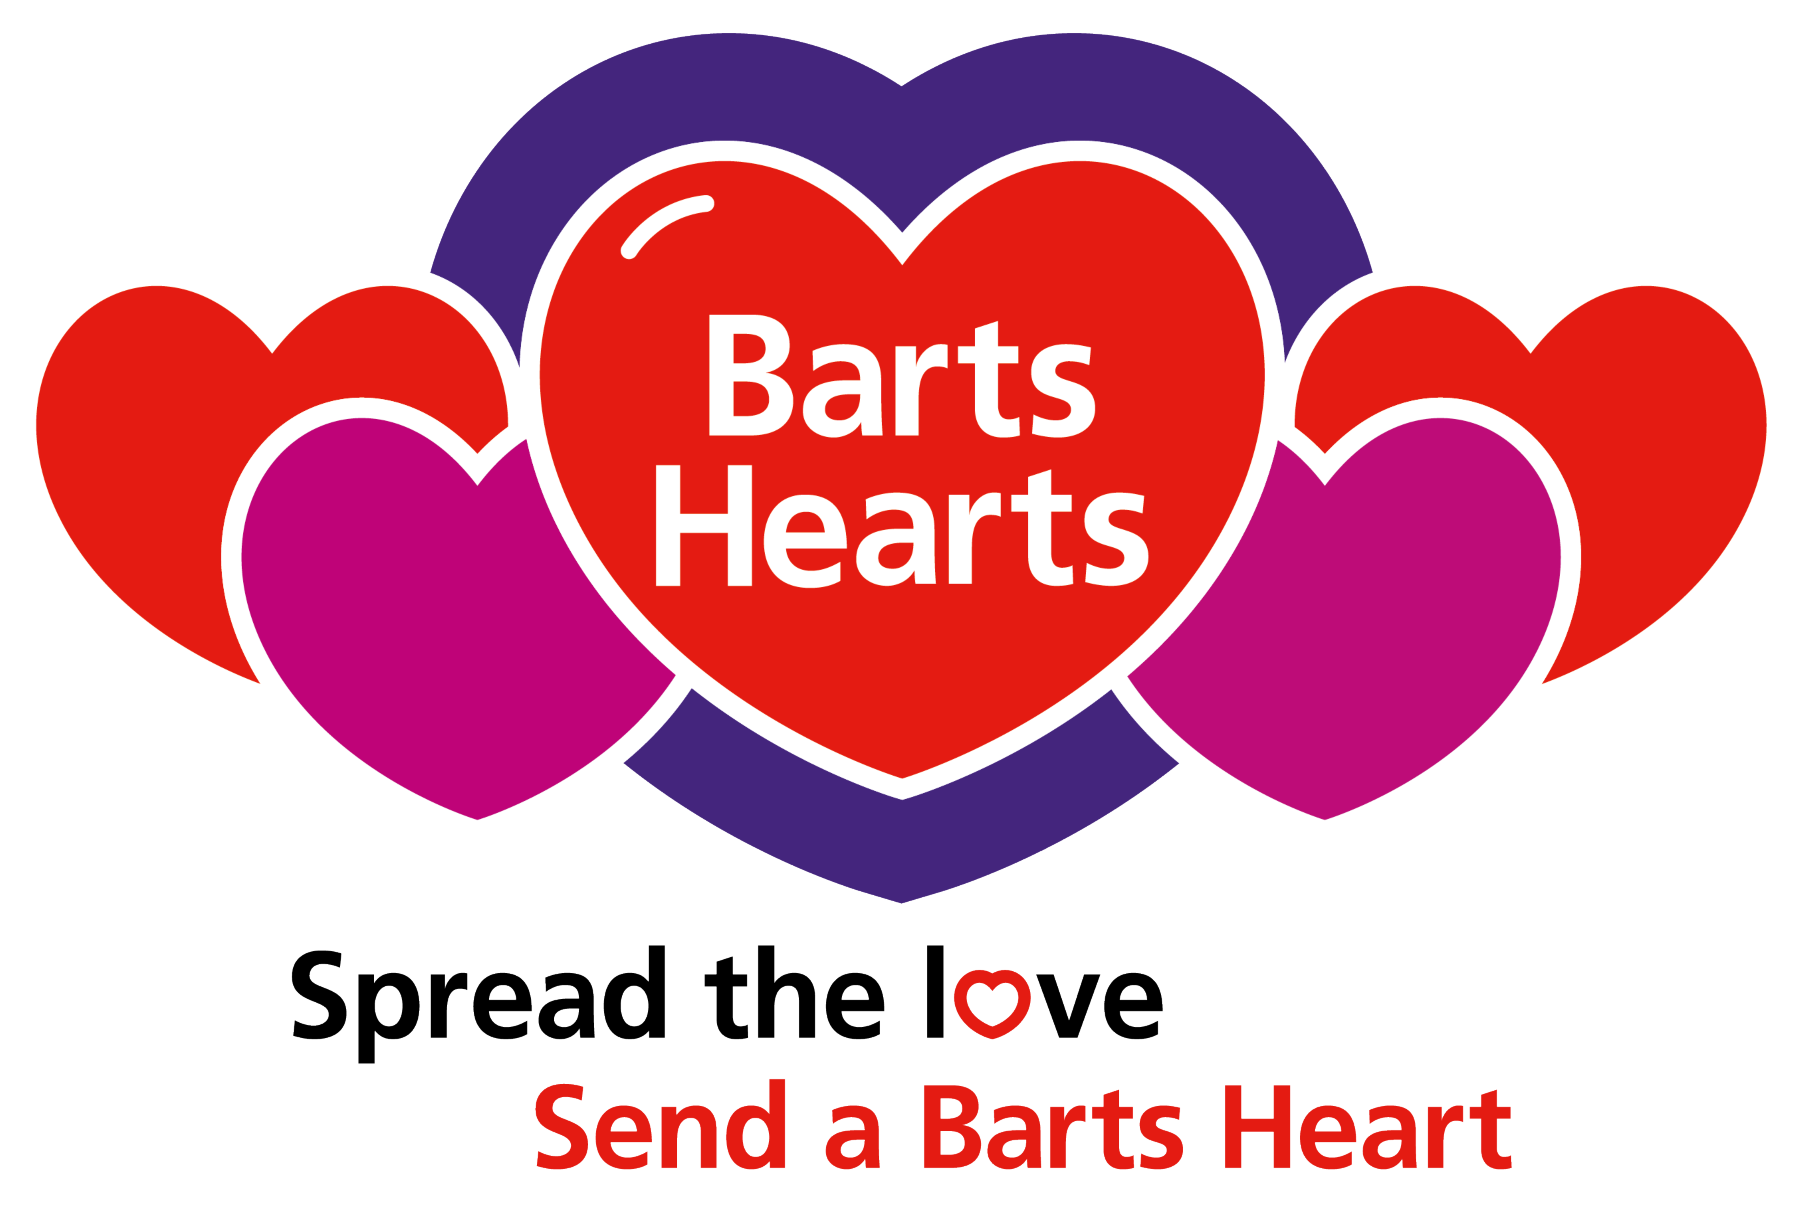 Barts Hearts logo with a tagline of spread the love